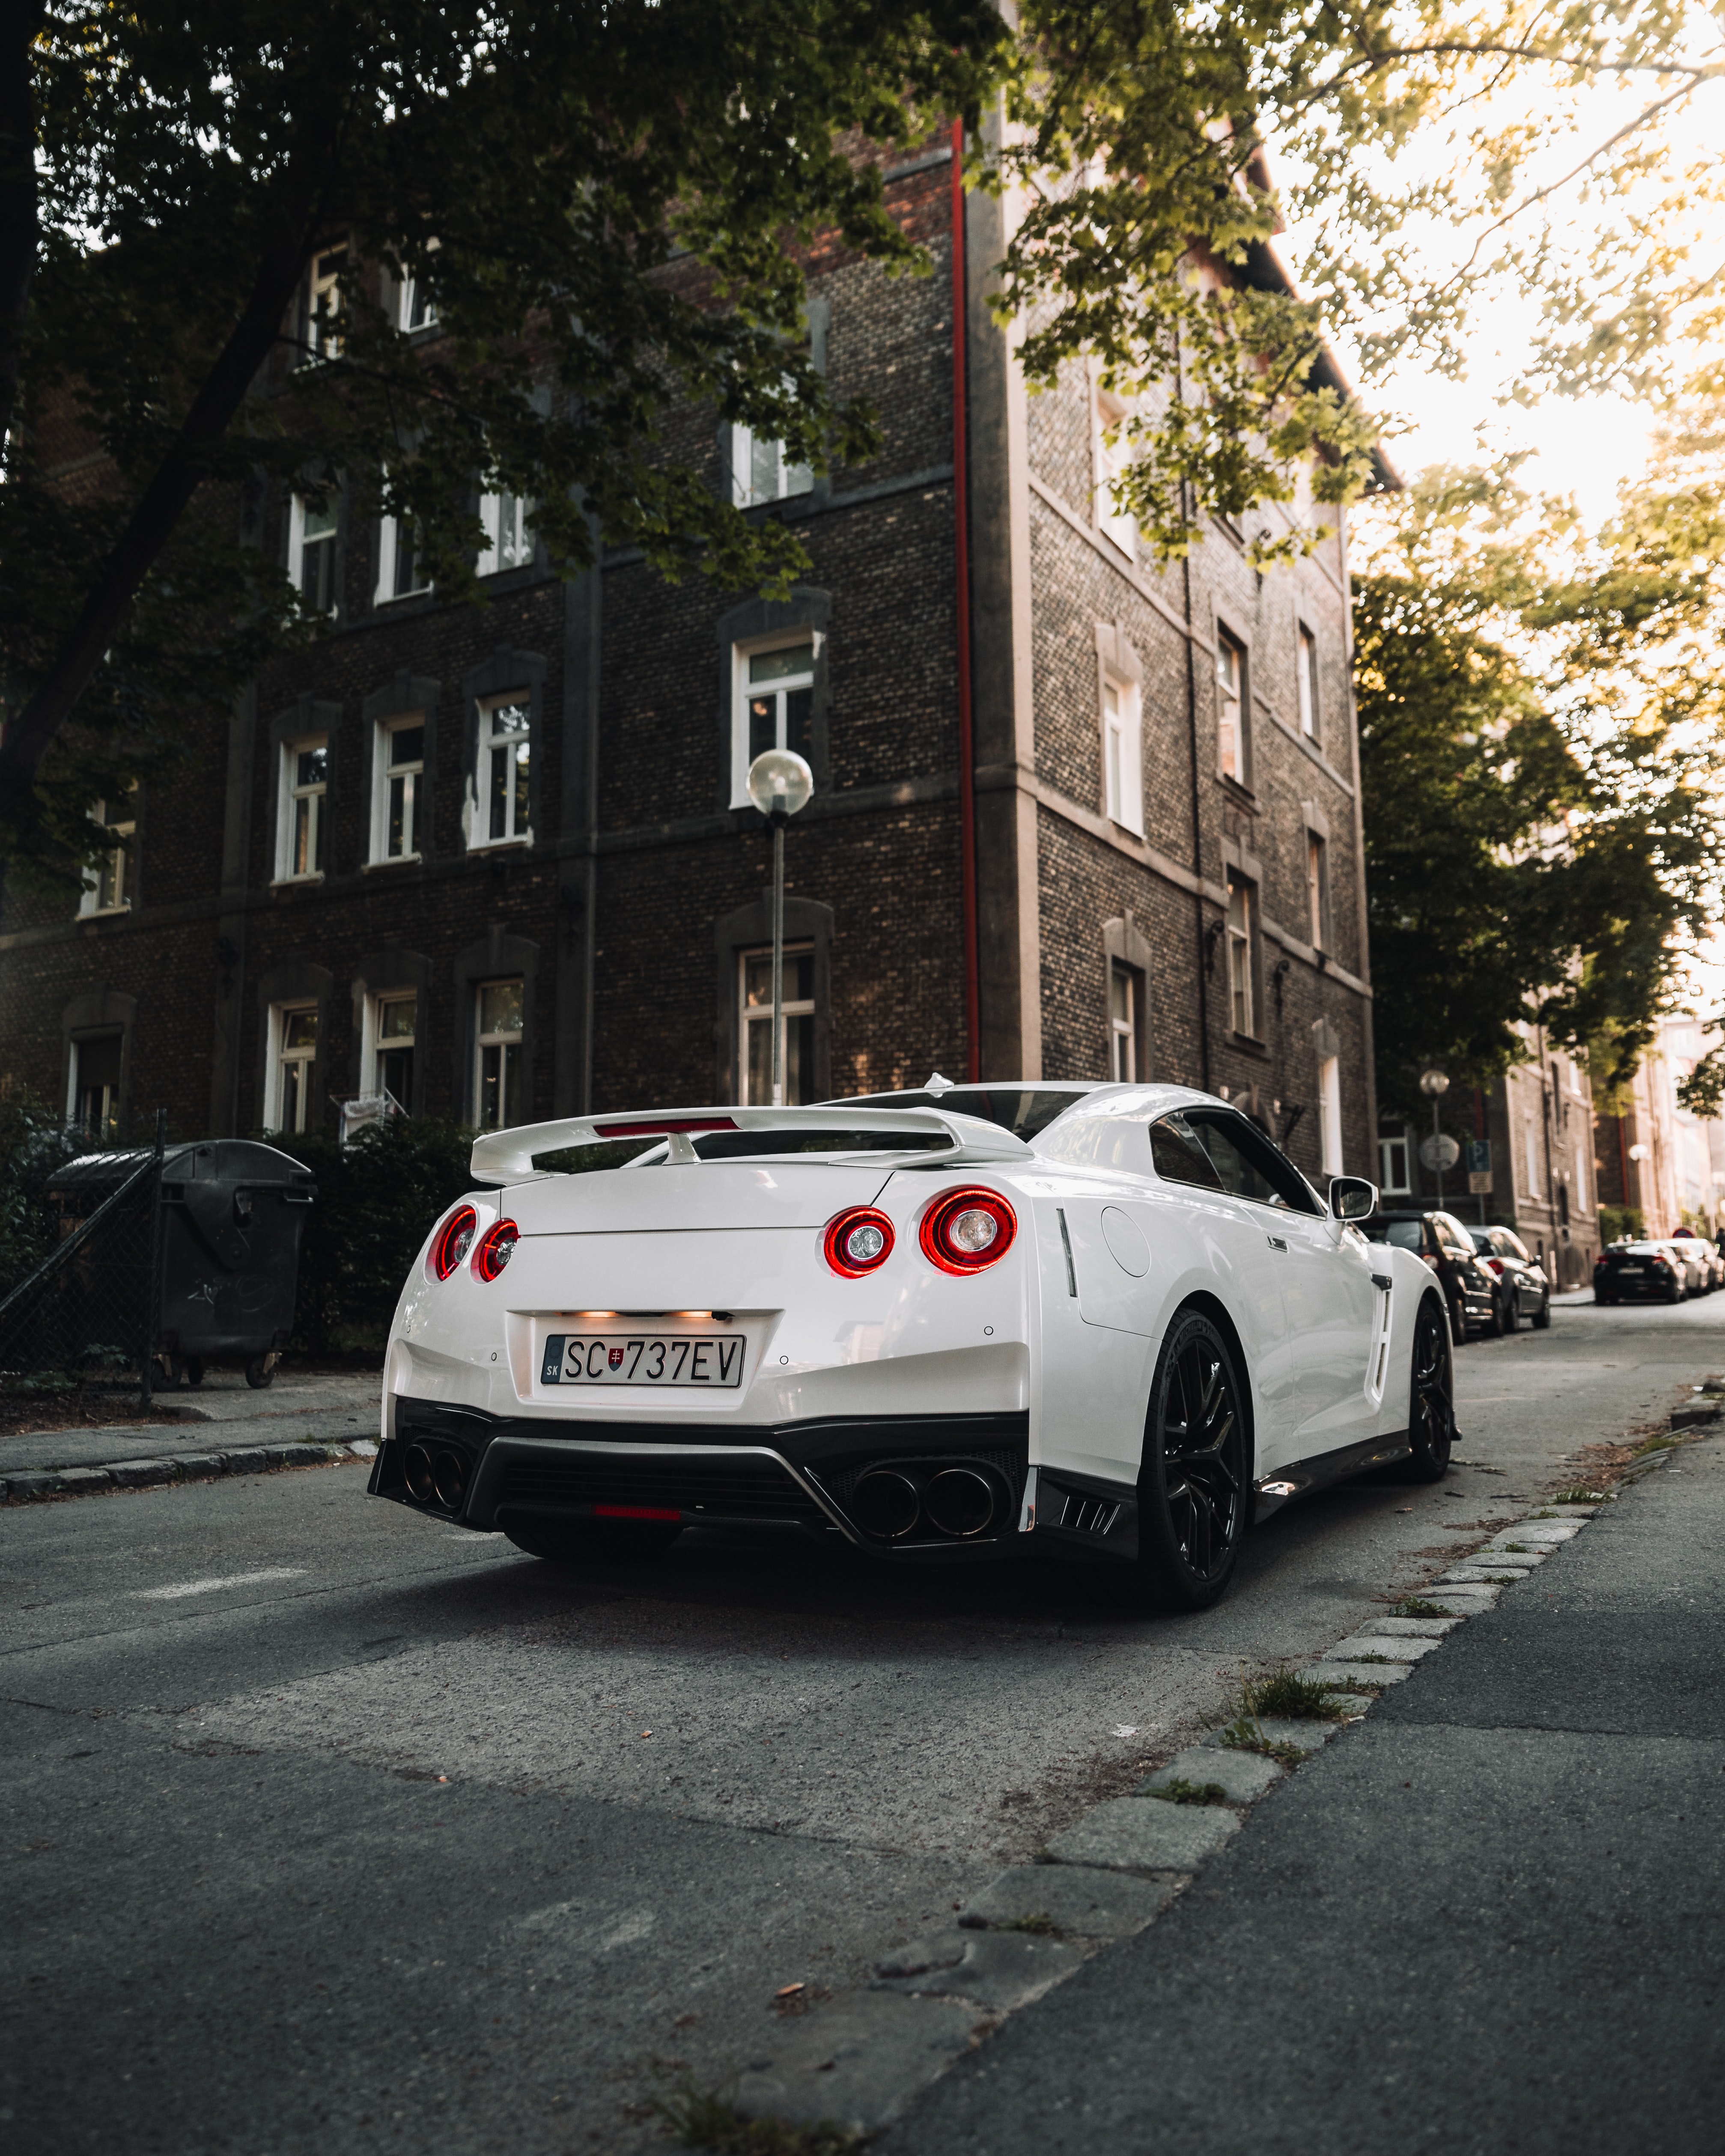 nissan gt-r, sports, sports car, nissan, cars, car, back view, rear view phone background